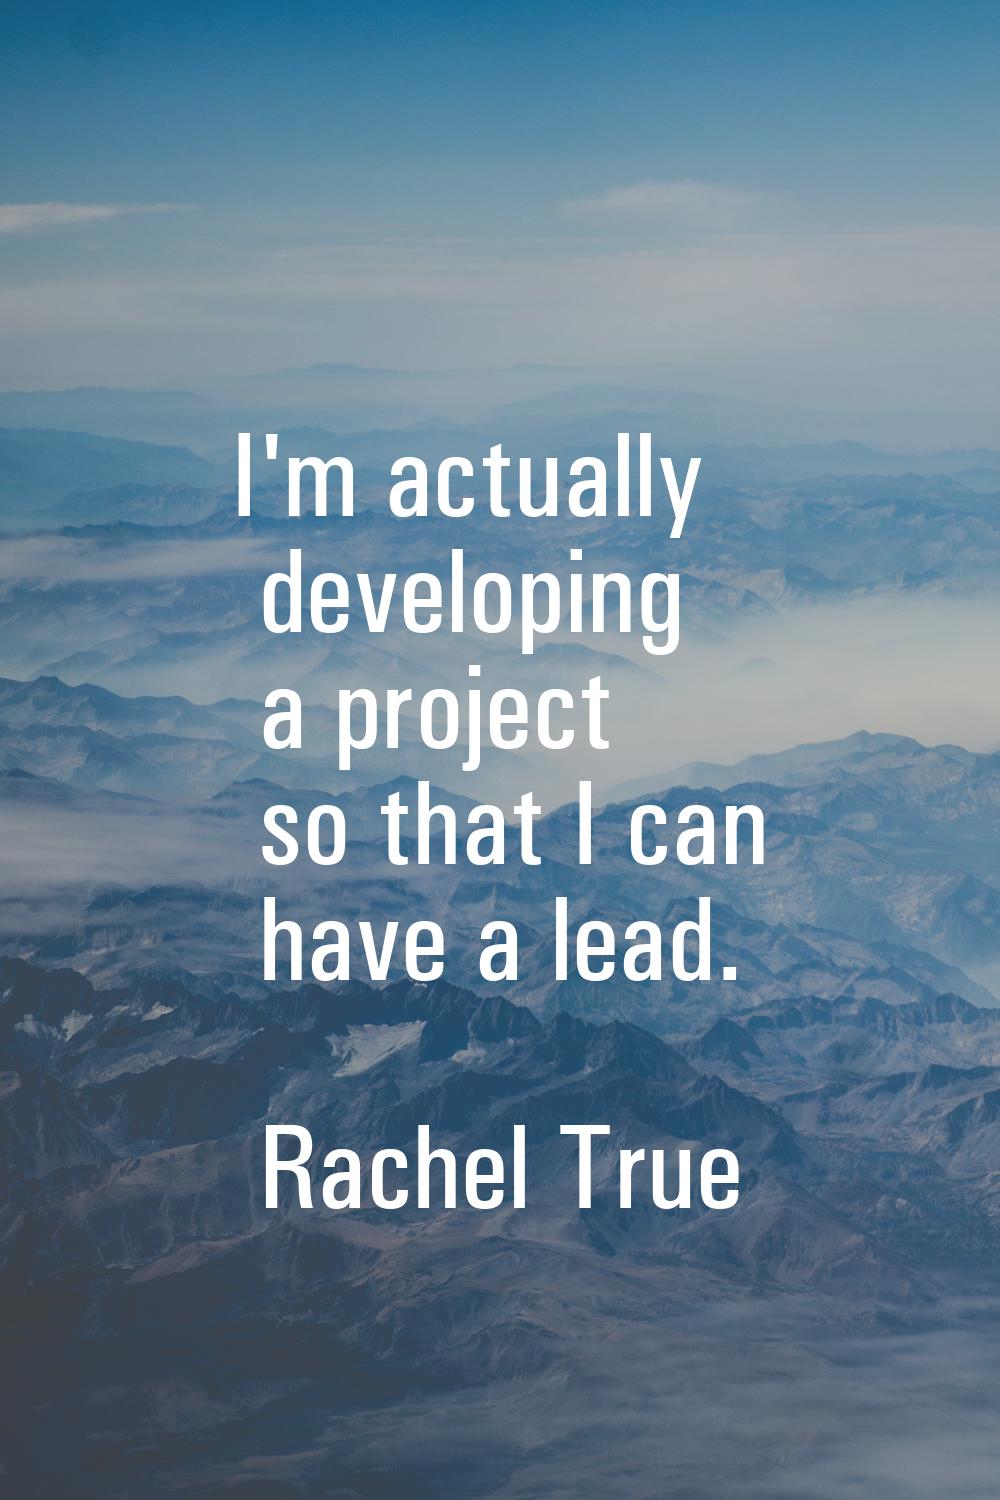 I'm actually developing a project so that I can have a lead.